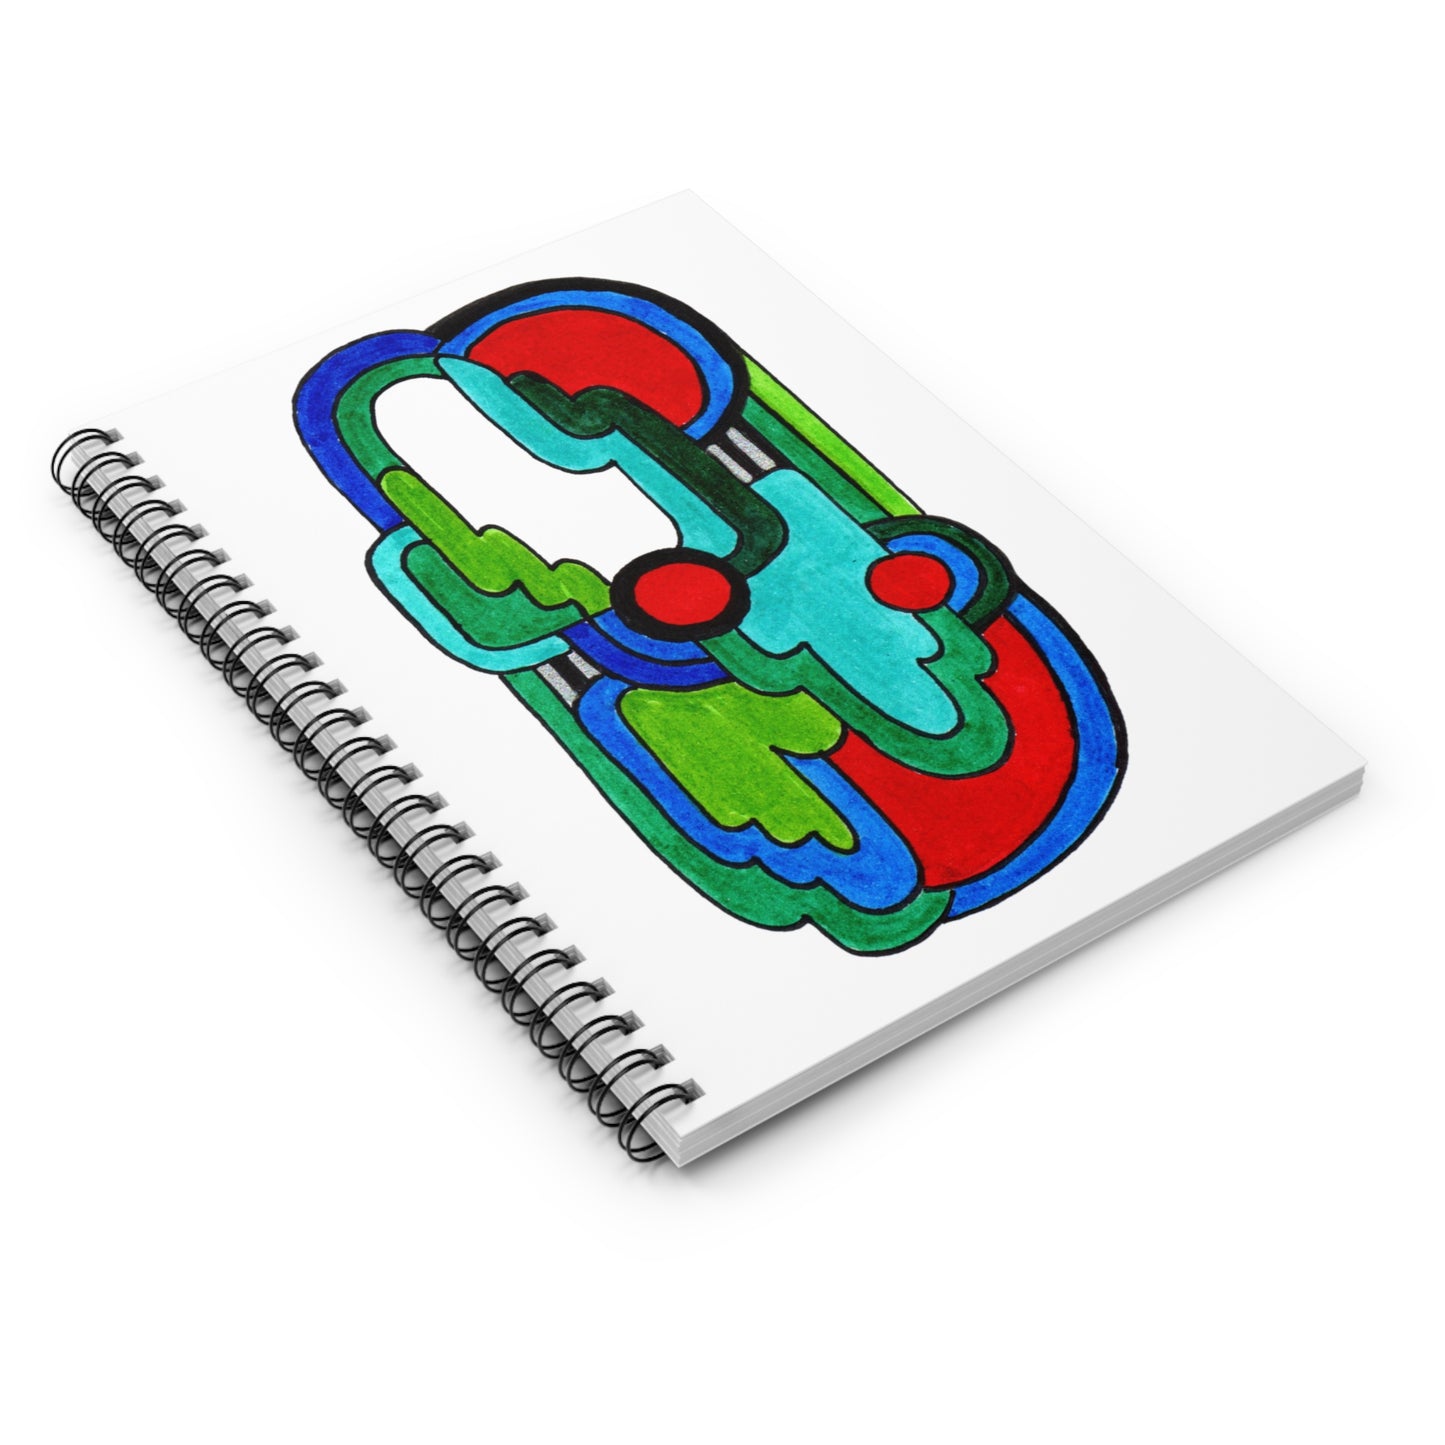 Abstract Hand Drawn Graphic Journal Colorful Pop Art Deco Spiral Notebook for Journaling Blank Page Book Ruled Line Notebook for taking Notes